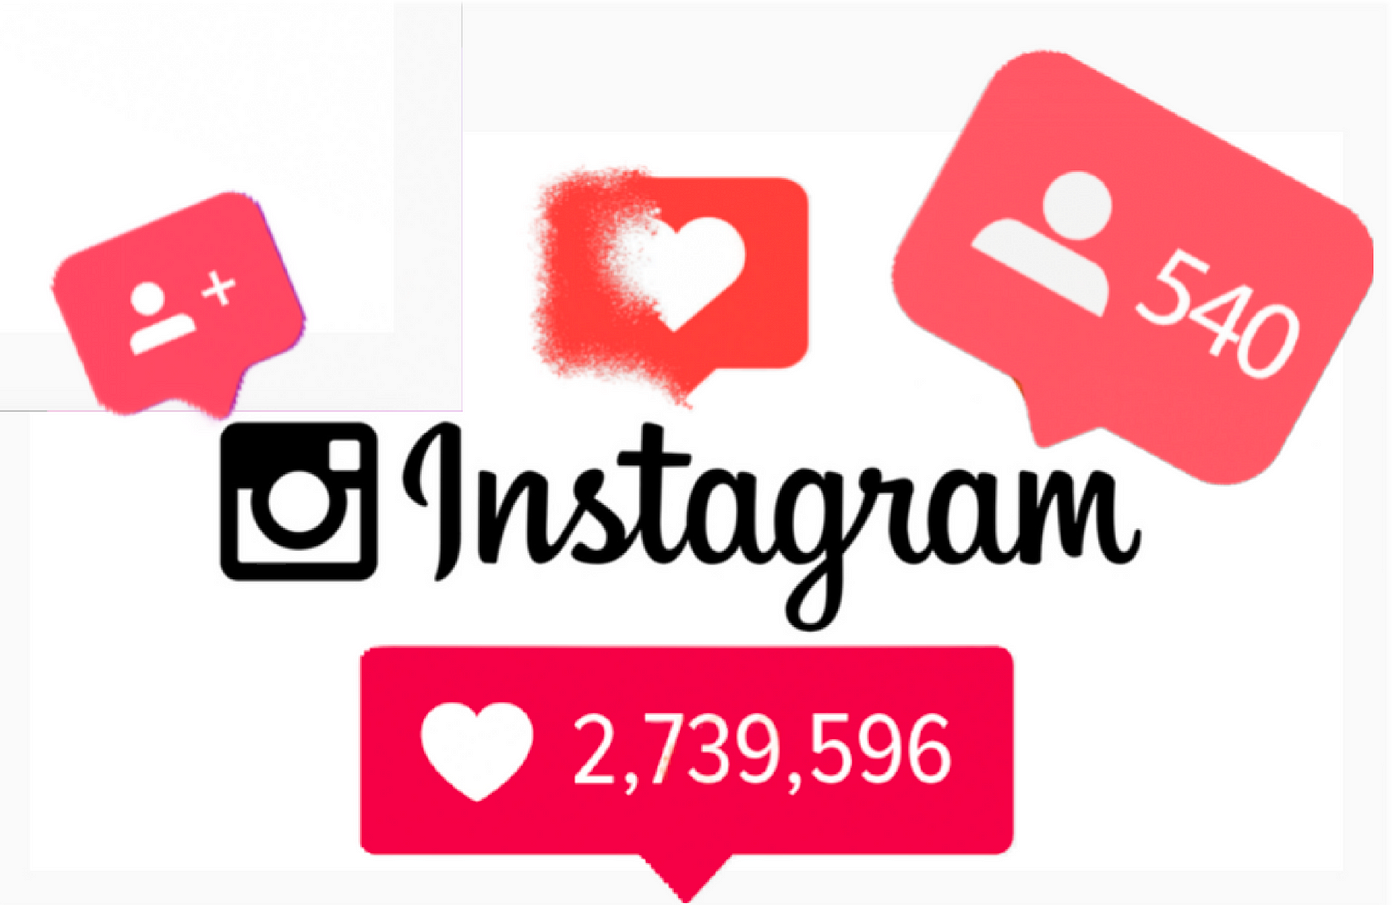 How To Get Followers On Instagram Without Following Anyone